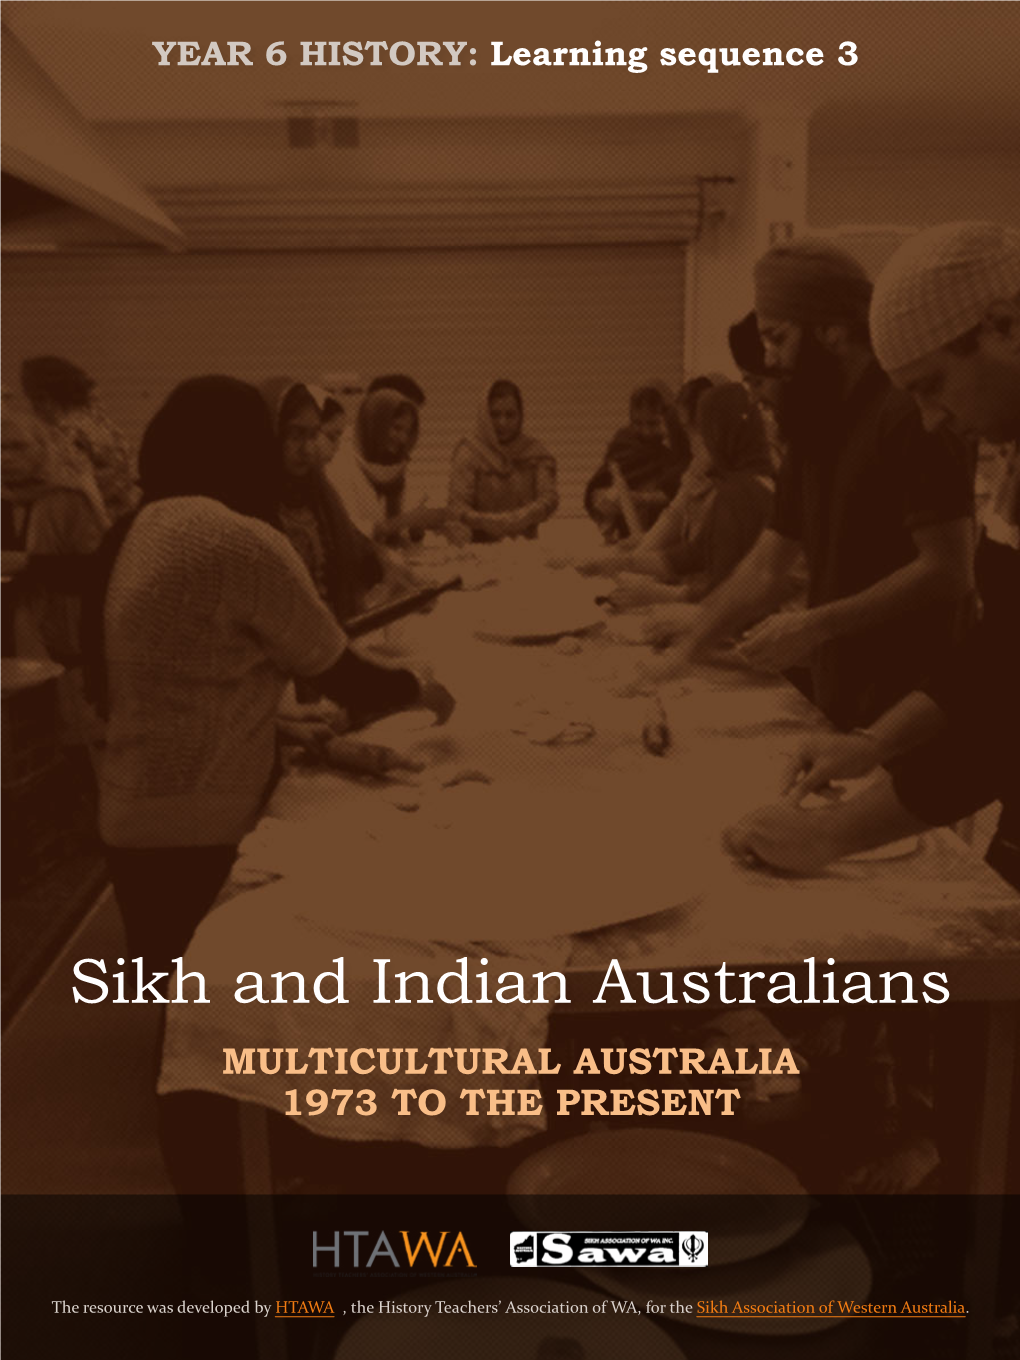 Sikh and Indian Australians MULTICULTURAL AUSTRALIA 1973 to the PRESENT